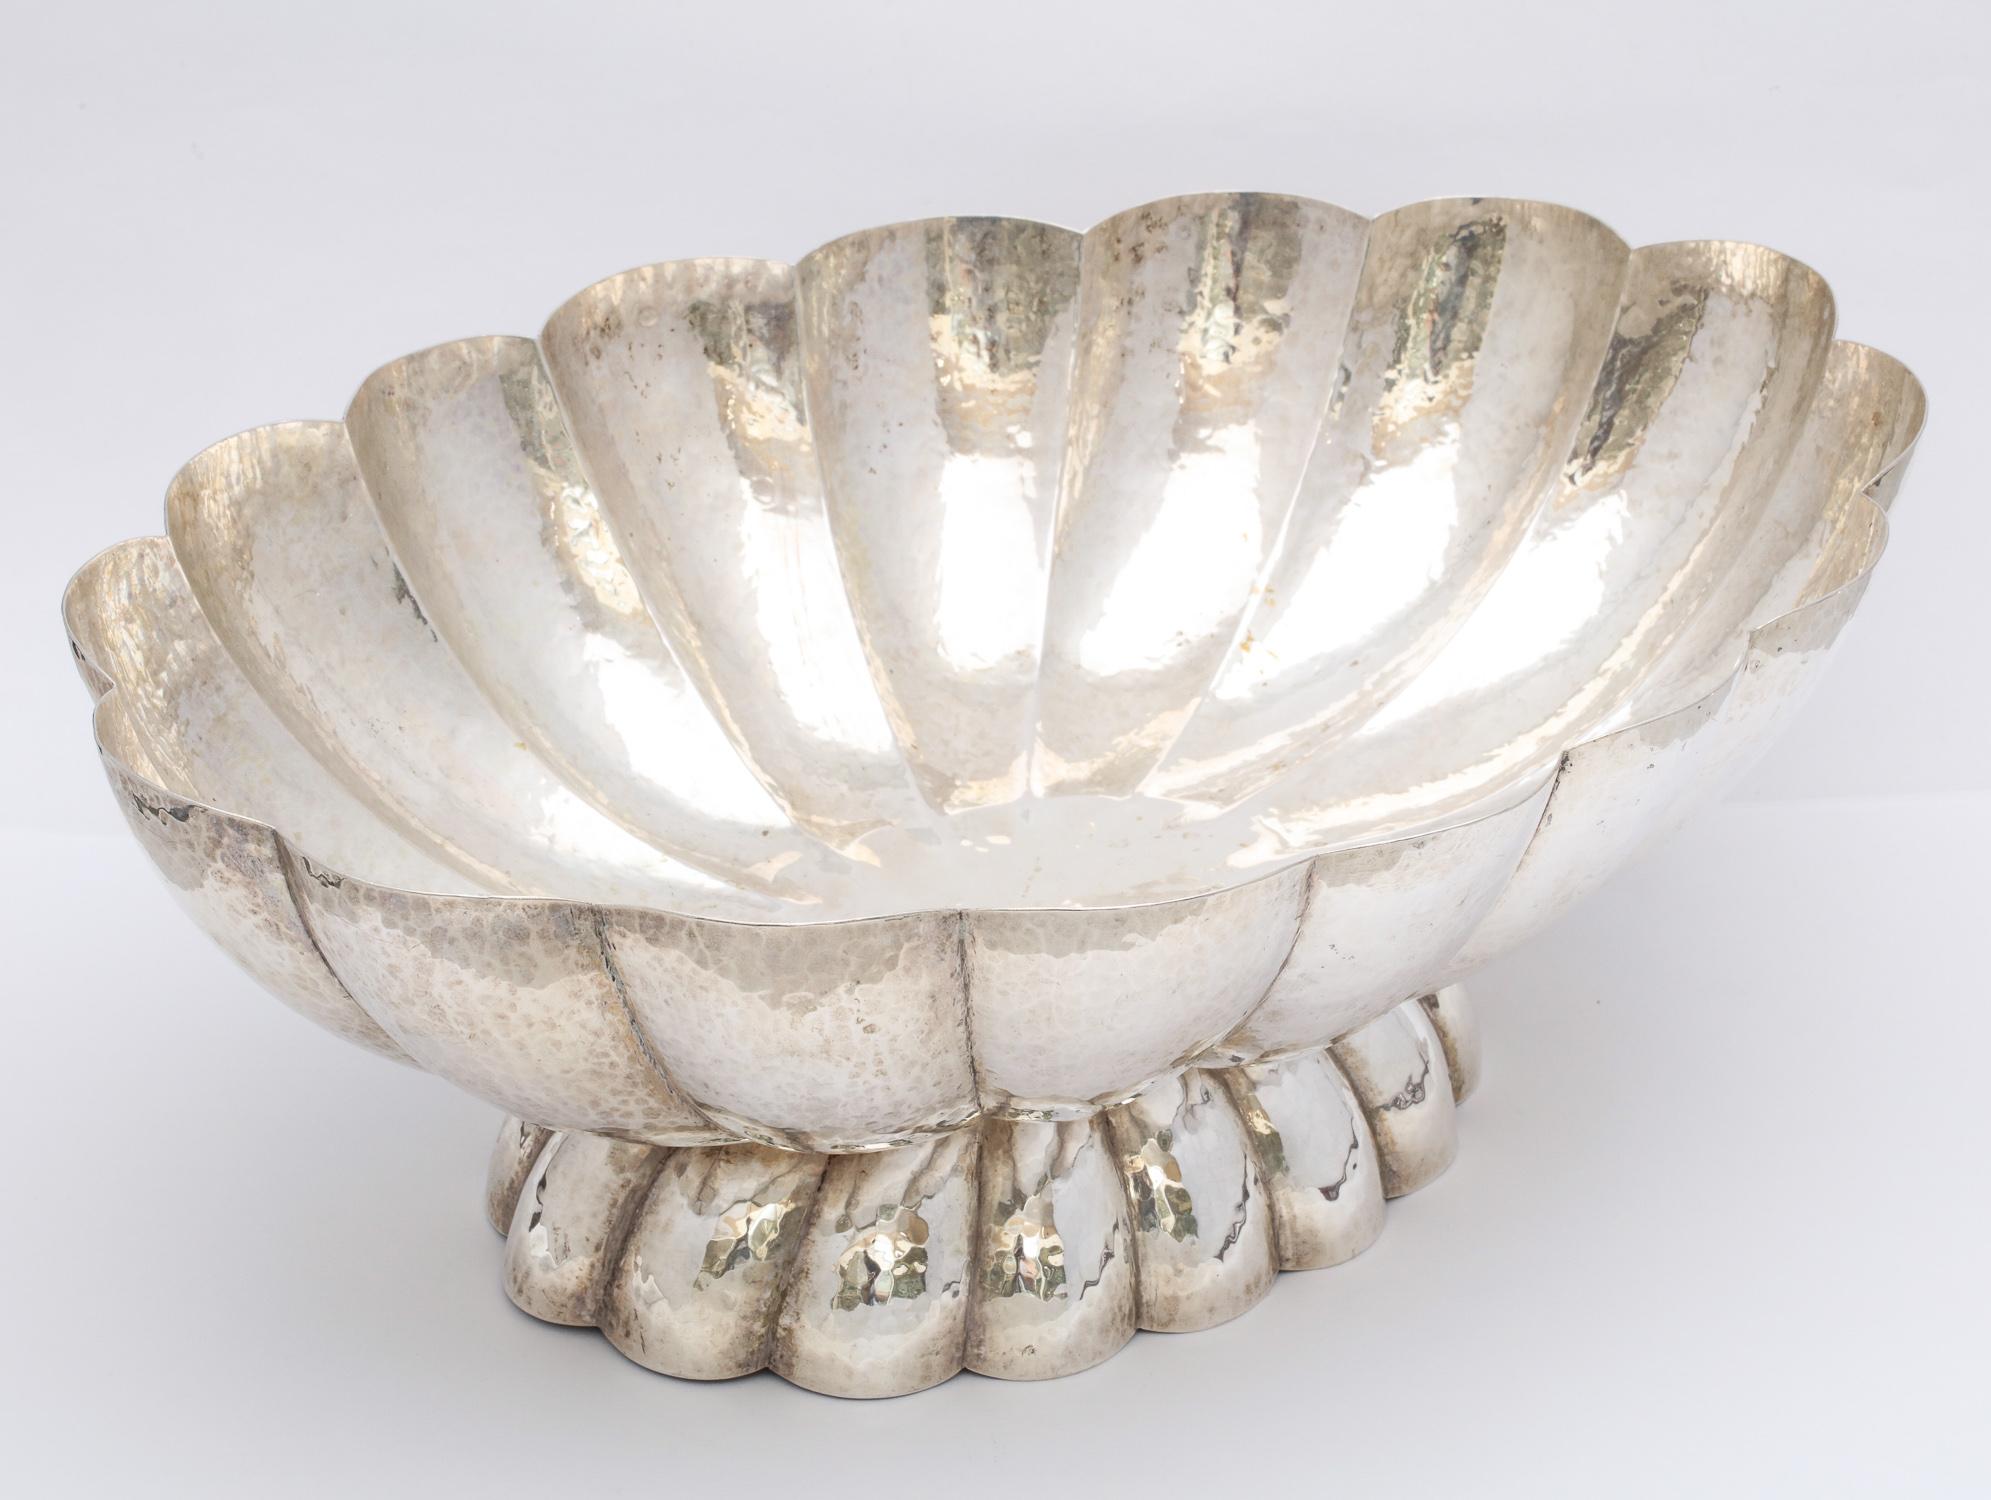 Art Deco, continental silver (.800), scalloped, hammered, pedestal-based centerpiece bowl, Austria, circa 1925, Bruder Frank, maker. Measures over 13 1/2 inches wide x 9 3/4 inches deep x 4 3/4 inches high. Weighs 27.865 Troy ounces. Dark spots in